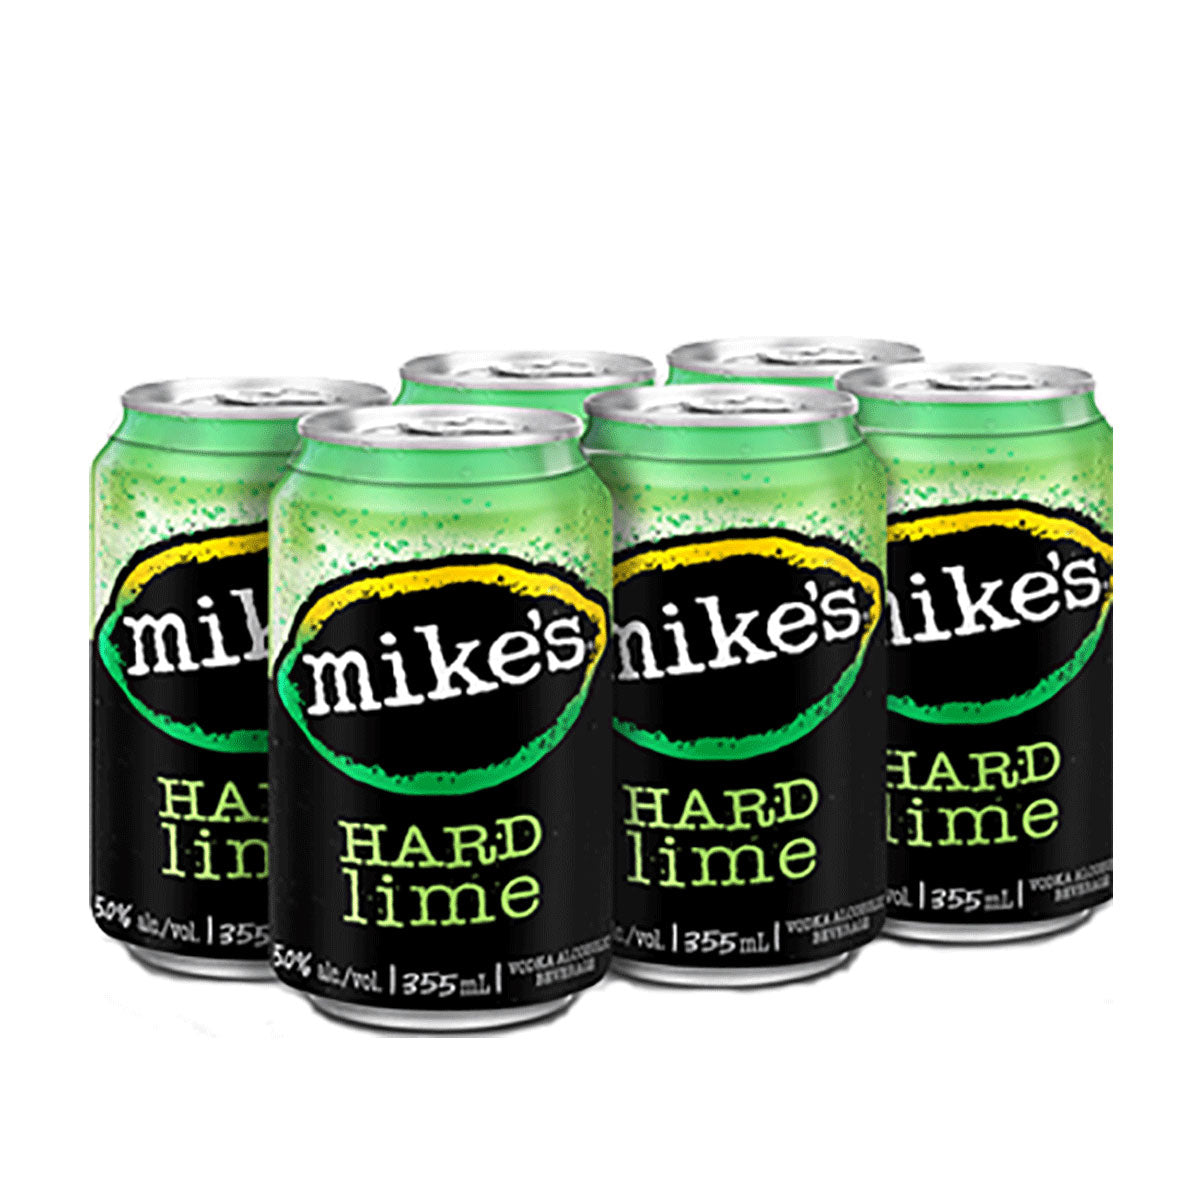 TAG Liquor Stores BC - Mike's Hard Lime 6 Pack Cans